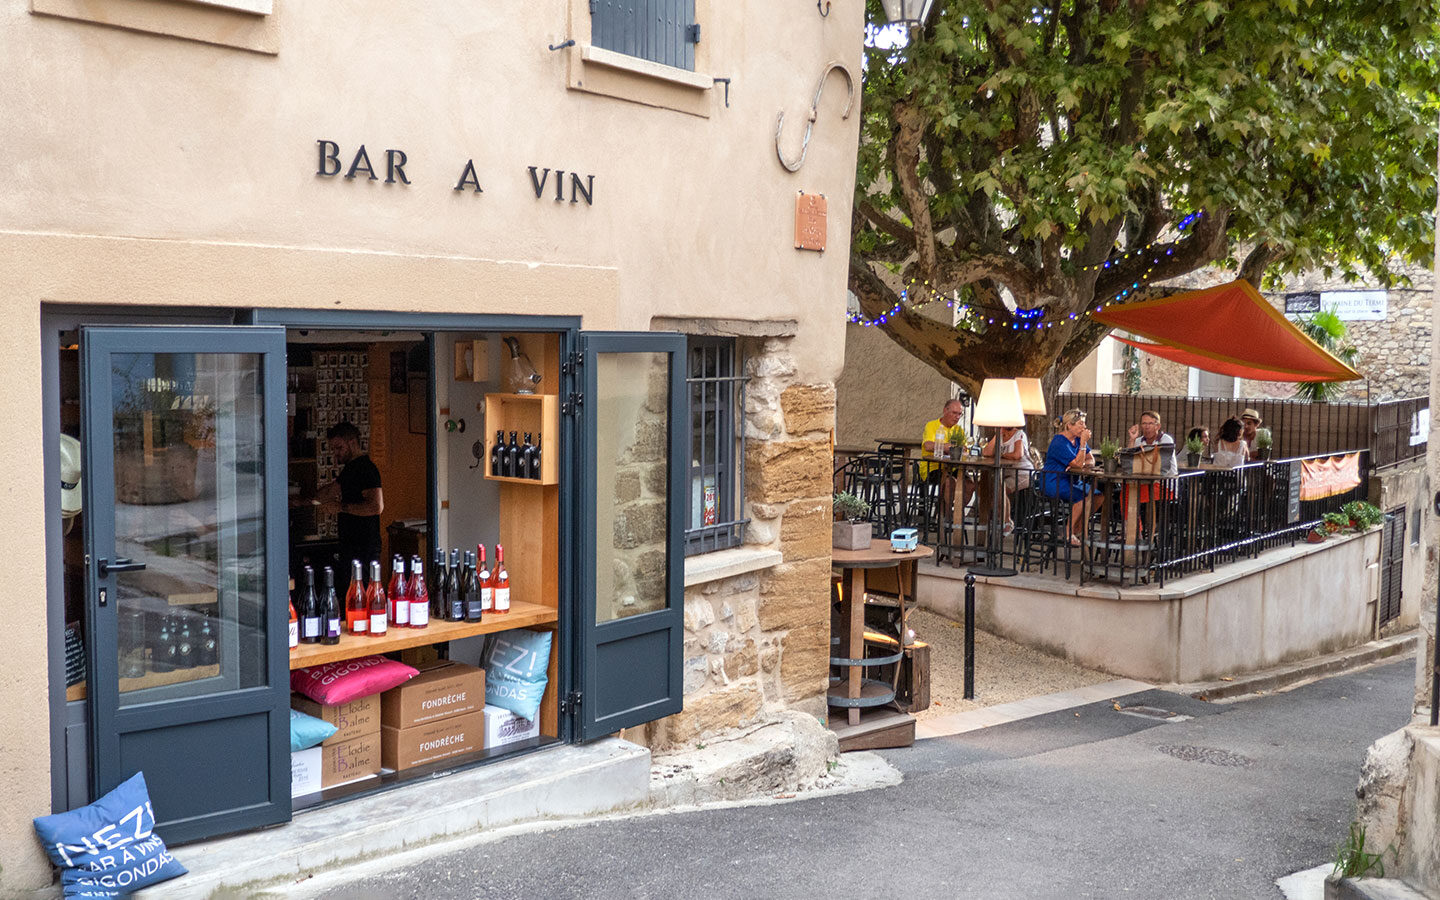 Wine-tasting in Gigondas in the South of France